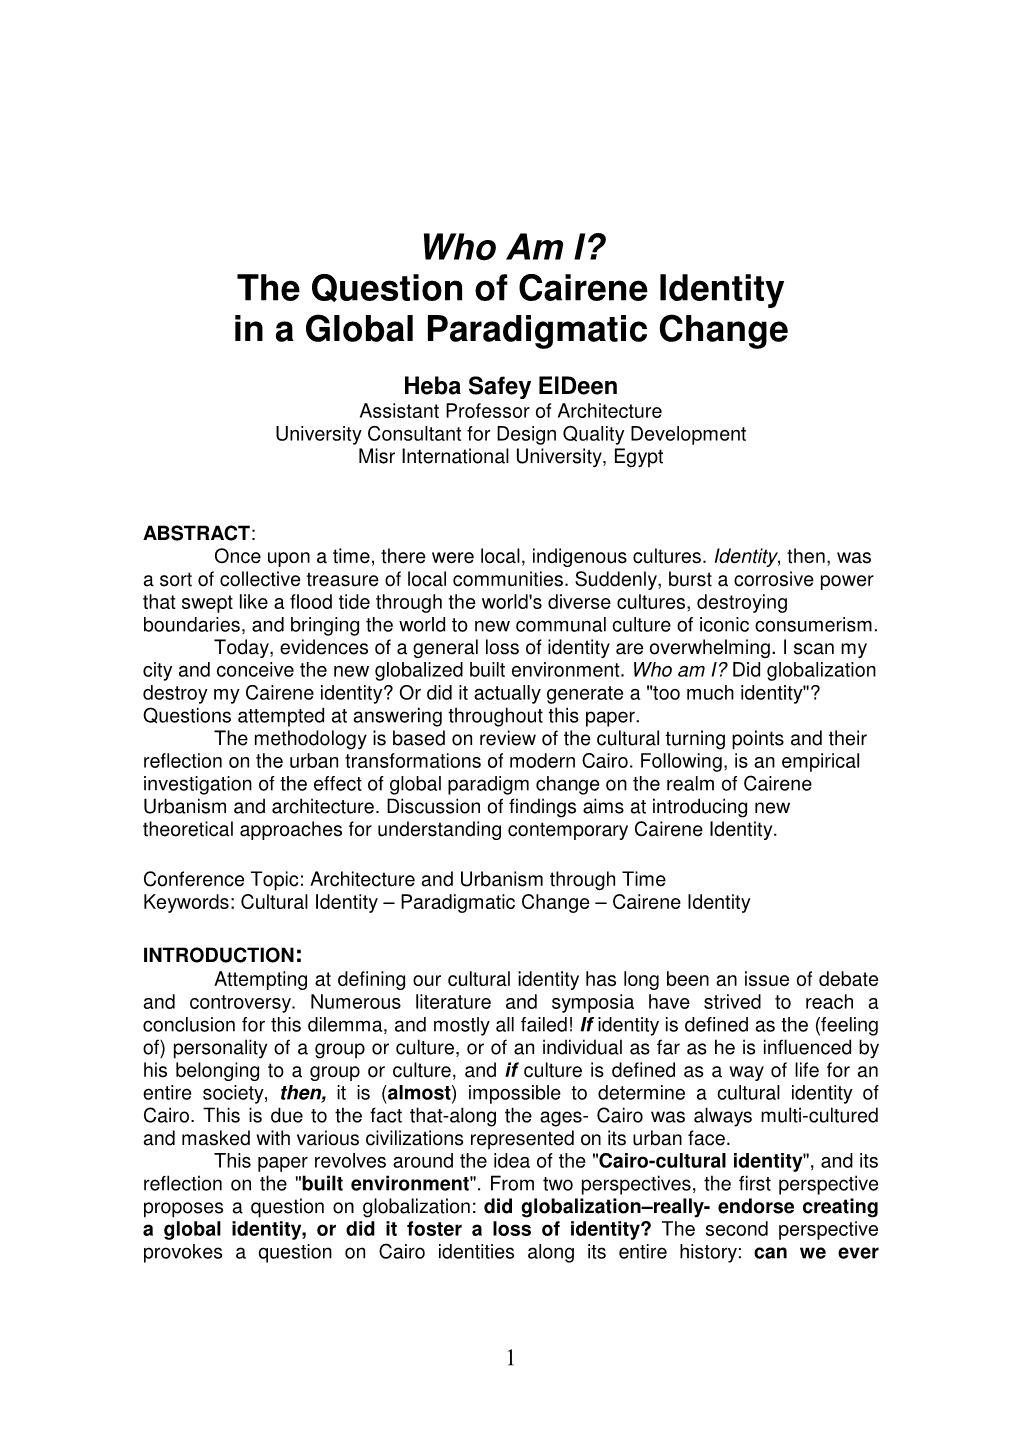 The Question of Cairene Identity in a Global Paradigmatic Change